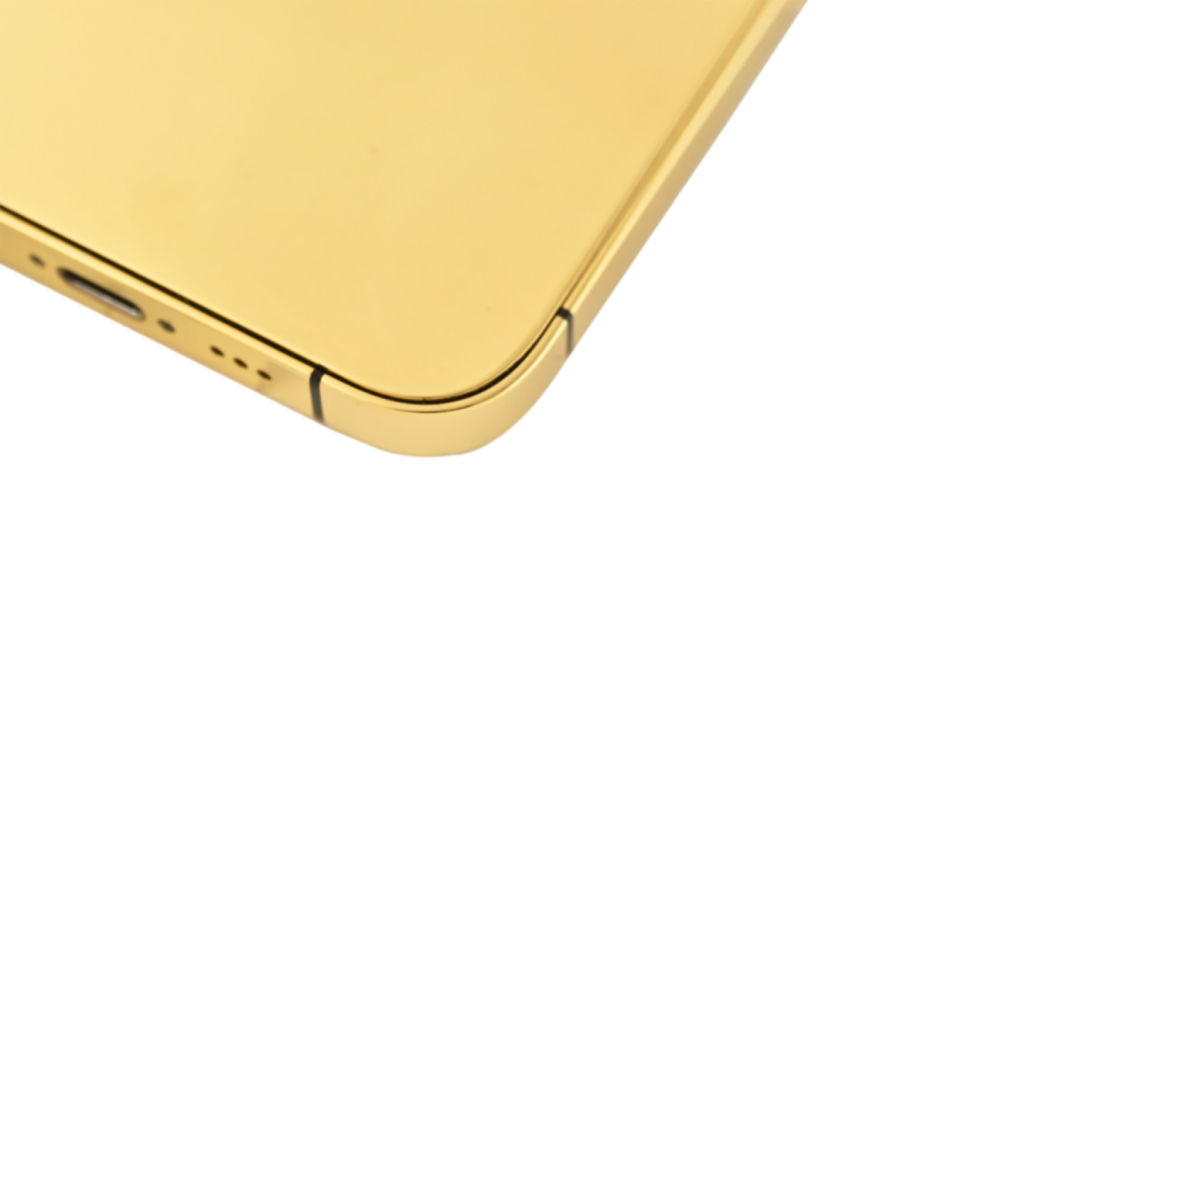 Caviar Luxury Customized 24K Full Gold Plated iPhone 14 Pro 128 GB Limited Edition